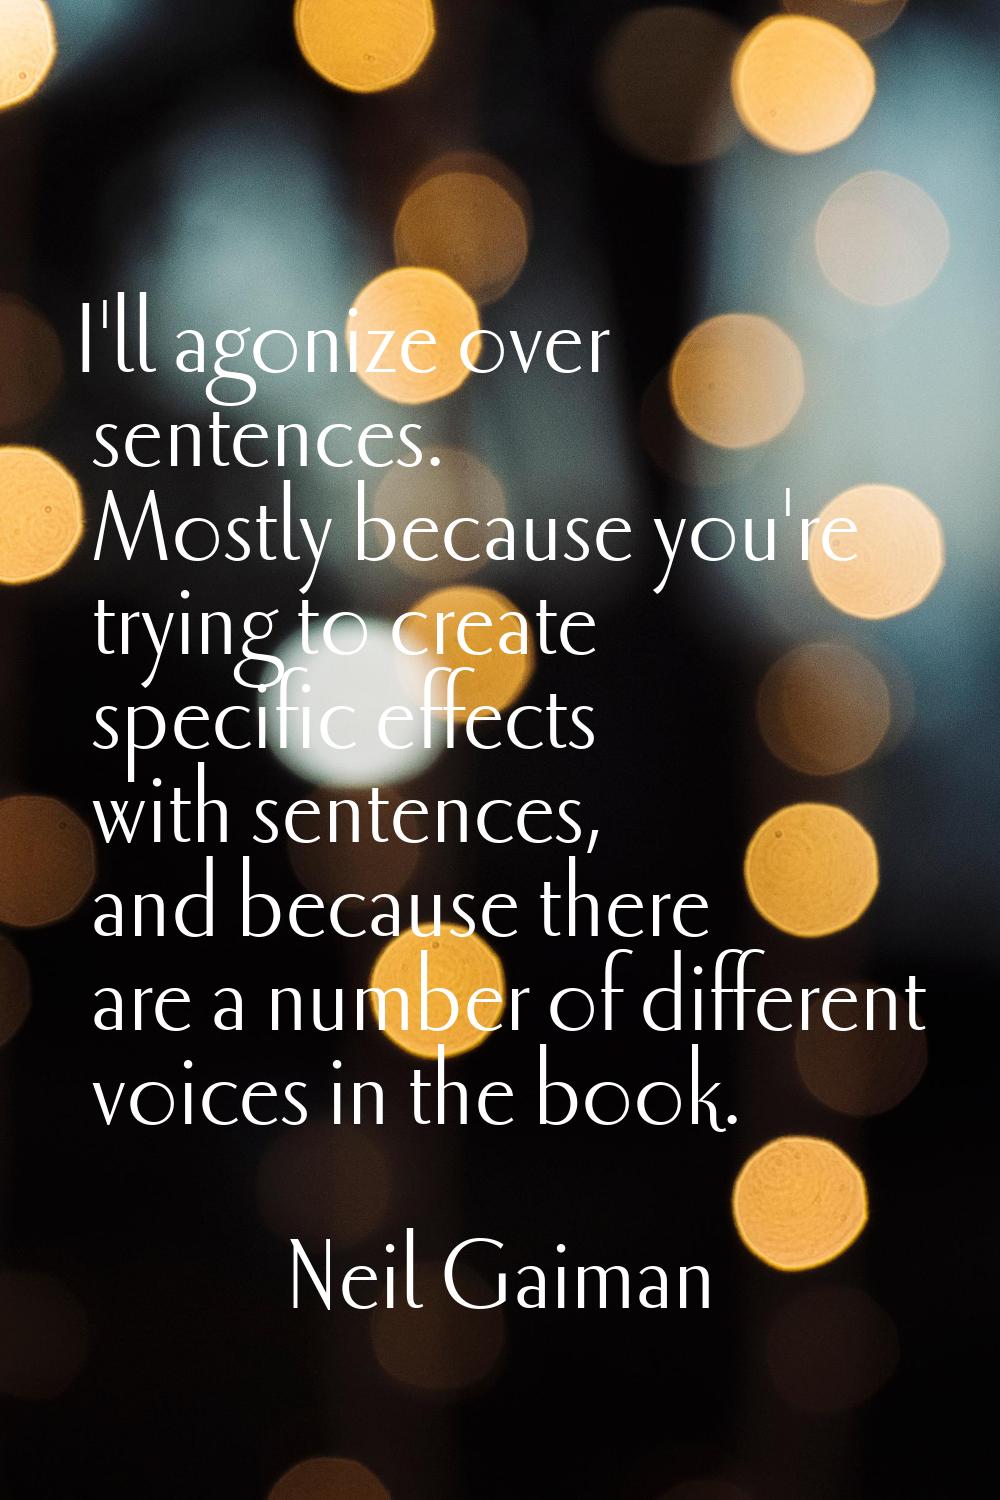 I'll agonize over sentences. Mostly because you're trying to create specific effects with sentences